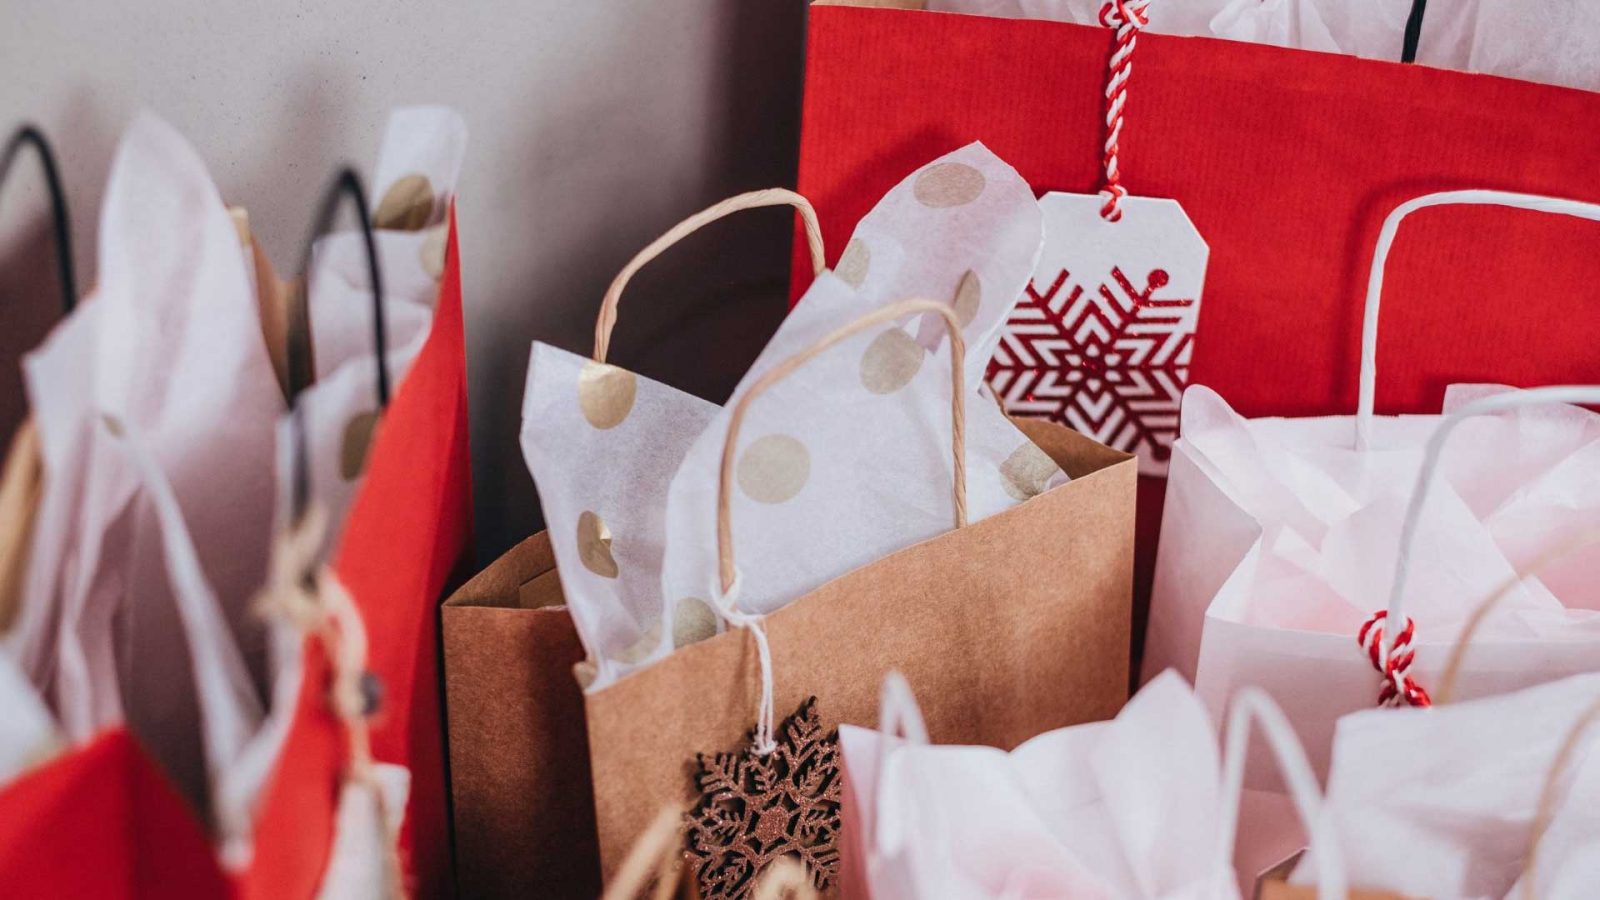 Shop Small, Shop Local for the Holidays